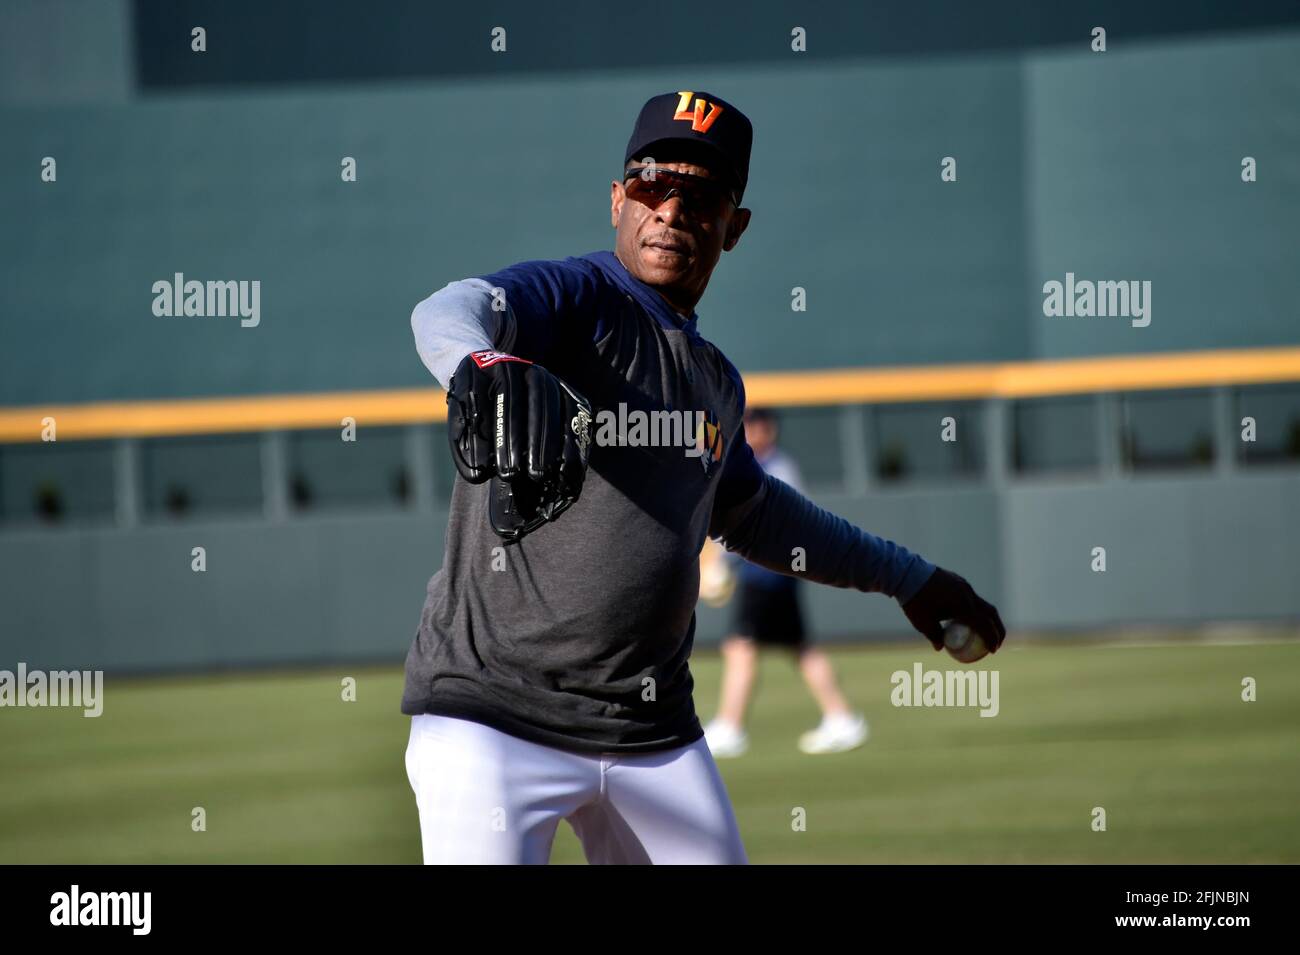 Las Vegas, Nevada, USA. 11th Apr, 2019. Retired Major League baseball  player and now special coach Rickey Henderson works with the Las Vegas  Aviators during practice before the team plays the Sacramento